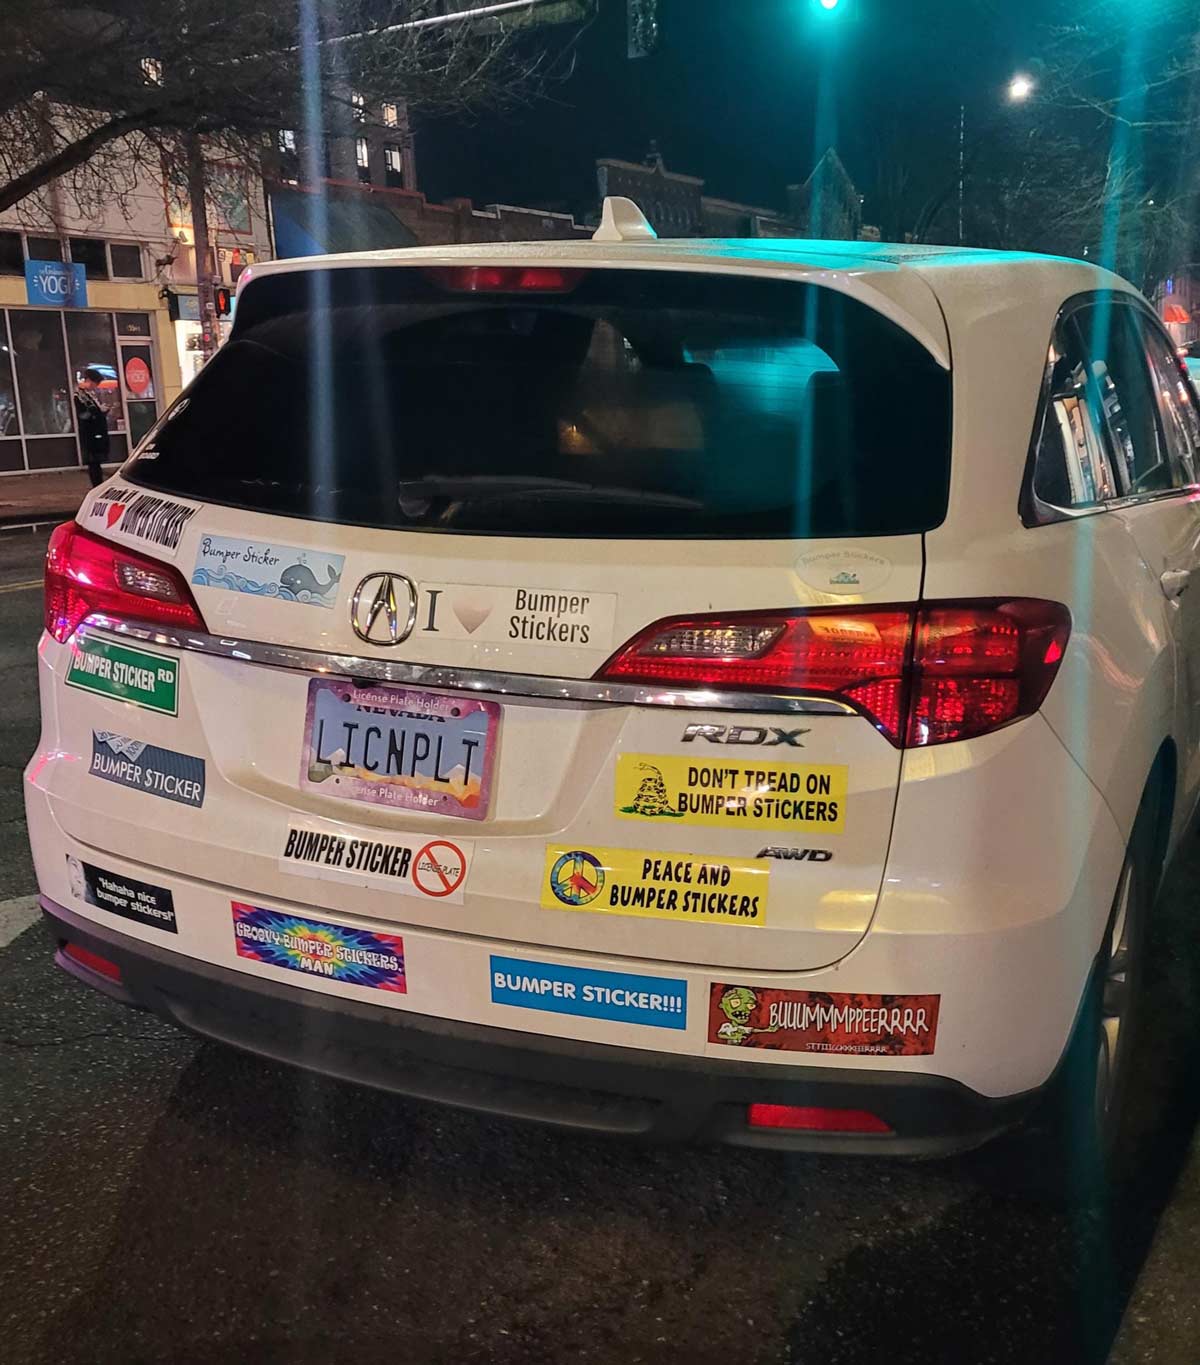 A car with bumper stickers